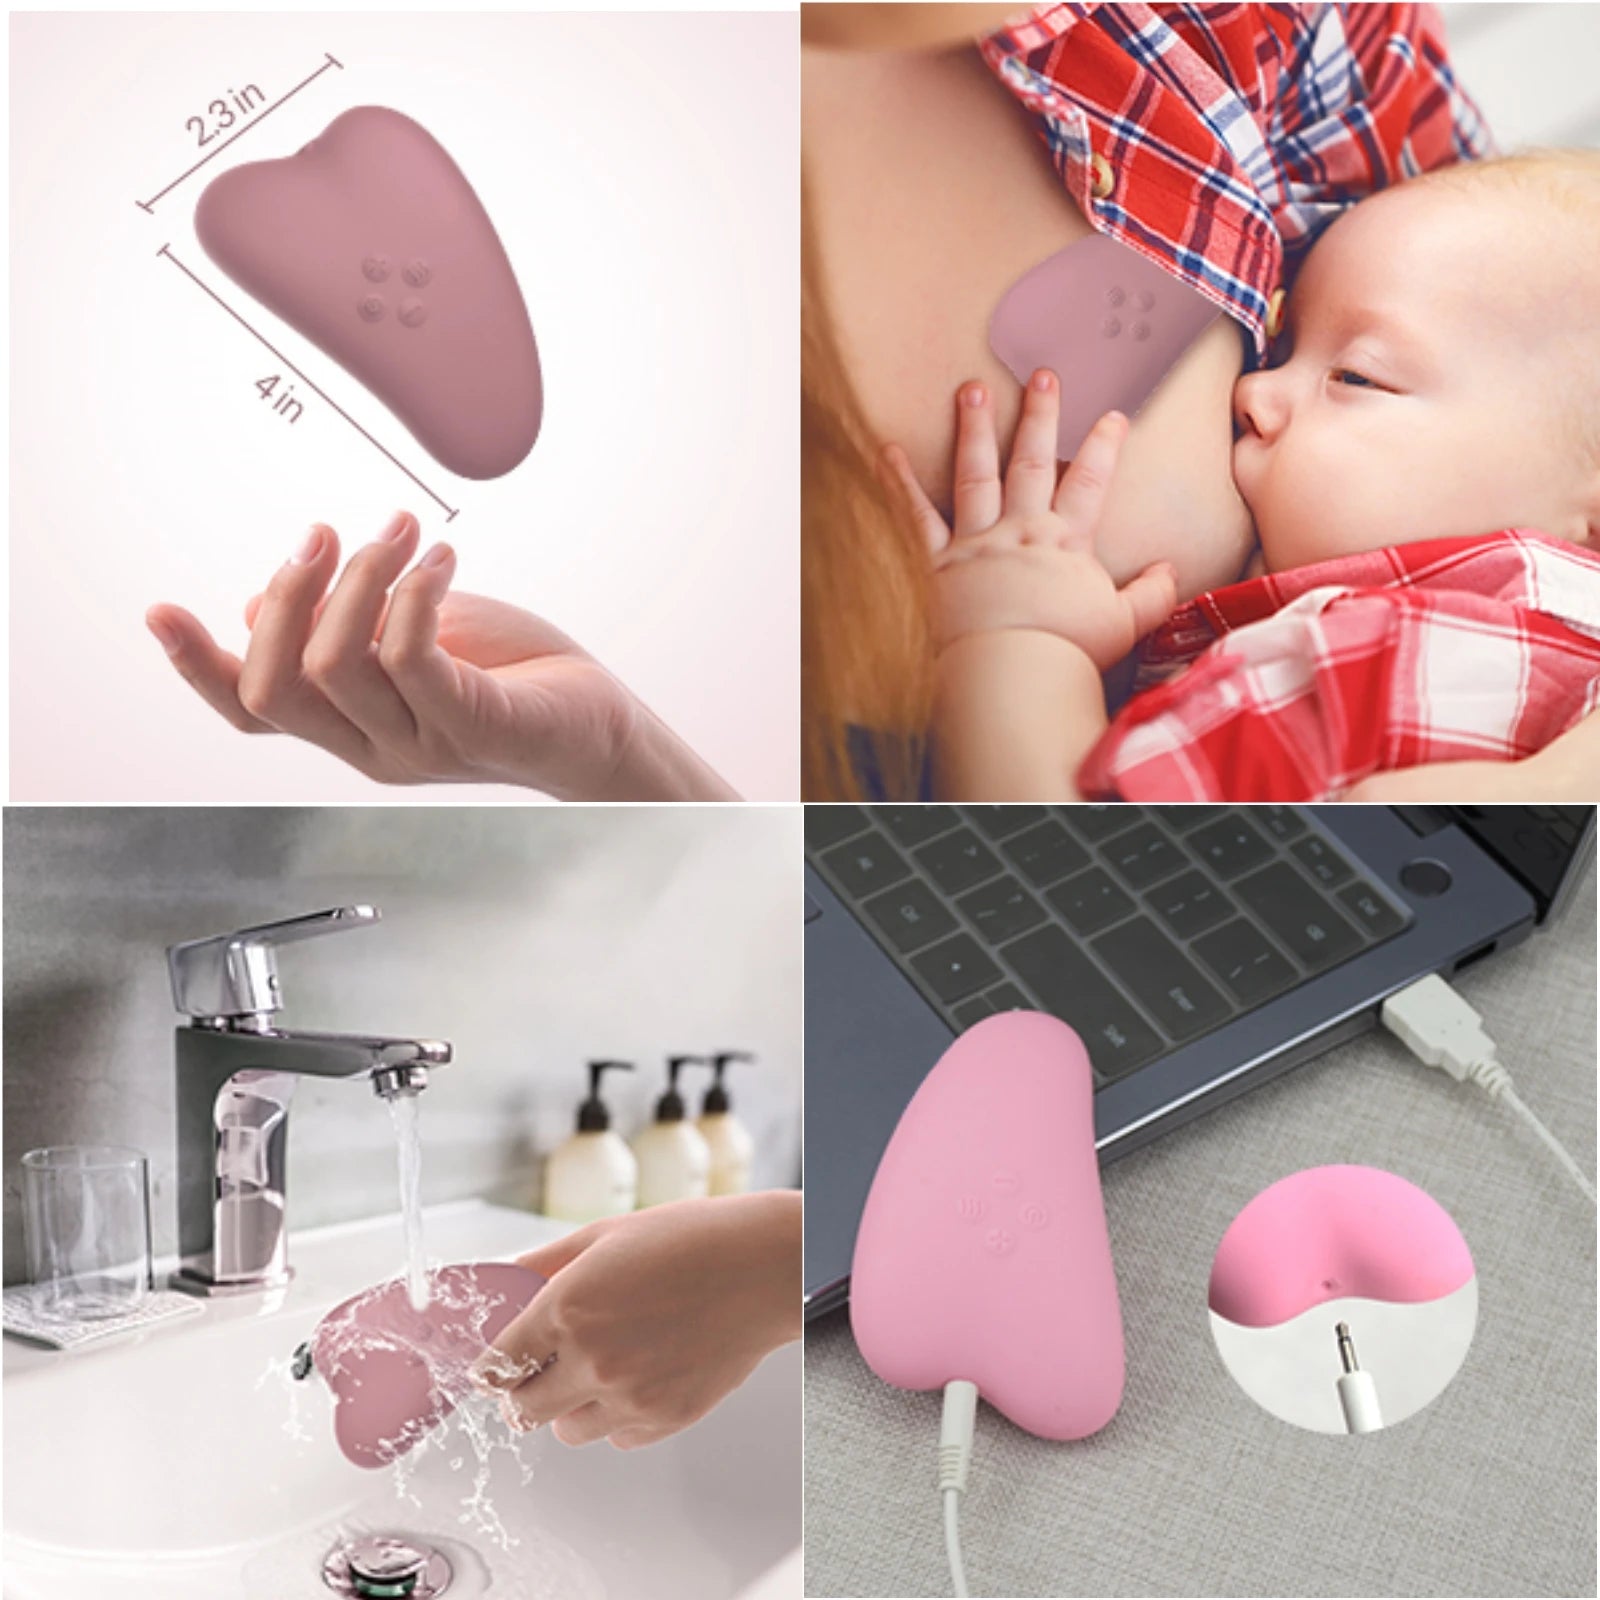 https://www.newcuddles.com/cdn/shop/files/Warming-Vibration-Breast-Massager-2-in-1-Heat-Adjustable-Masaging-Clogged-Ducts-for-Lactation-Improve-Galactosis.jpg__4.webp?v=1704153595